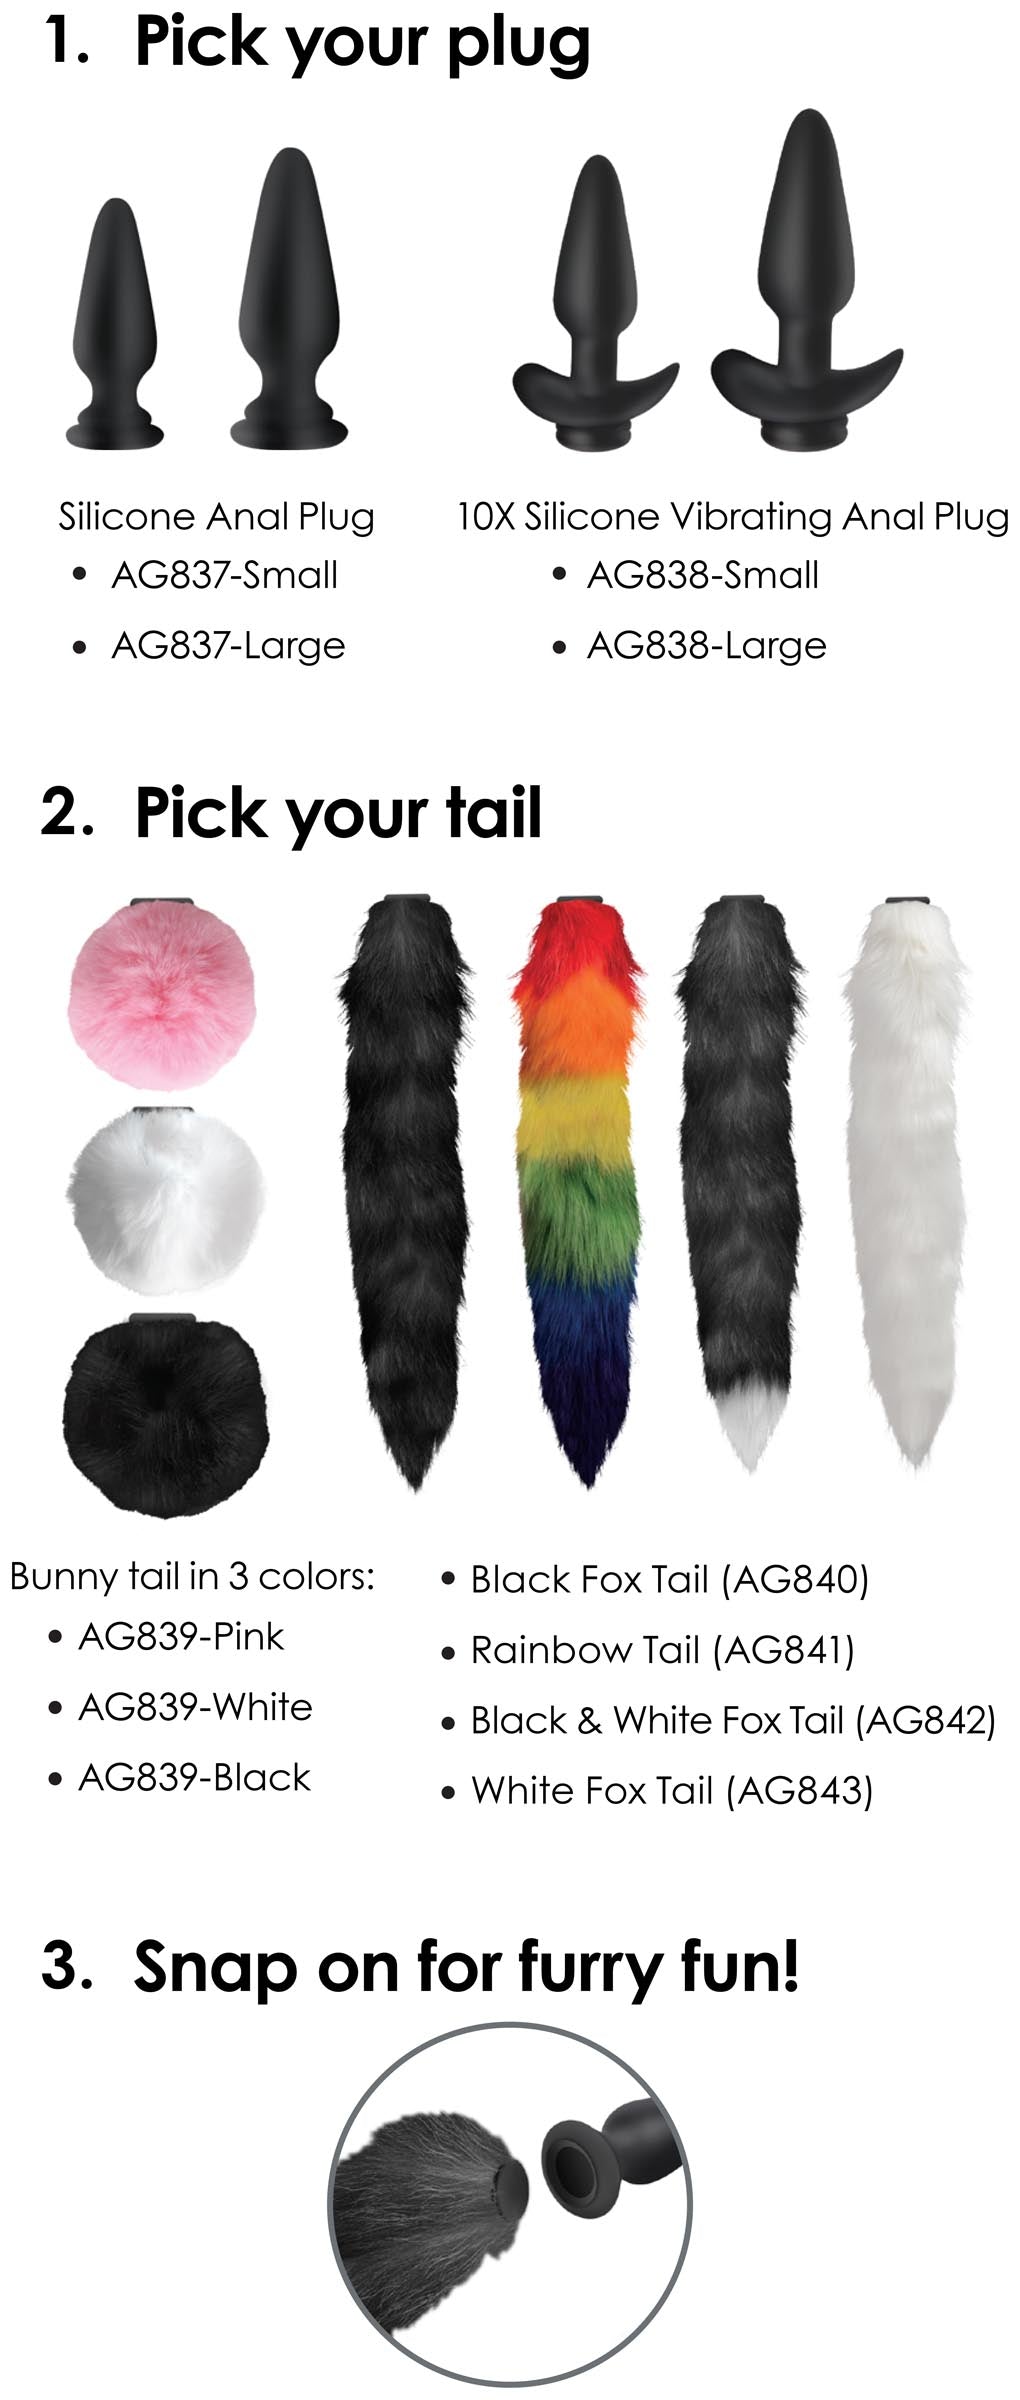 Small Anal Plug With Interchangeable Bunny Tail - Black